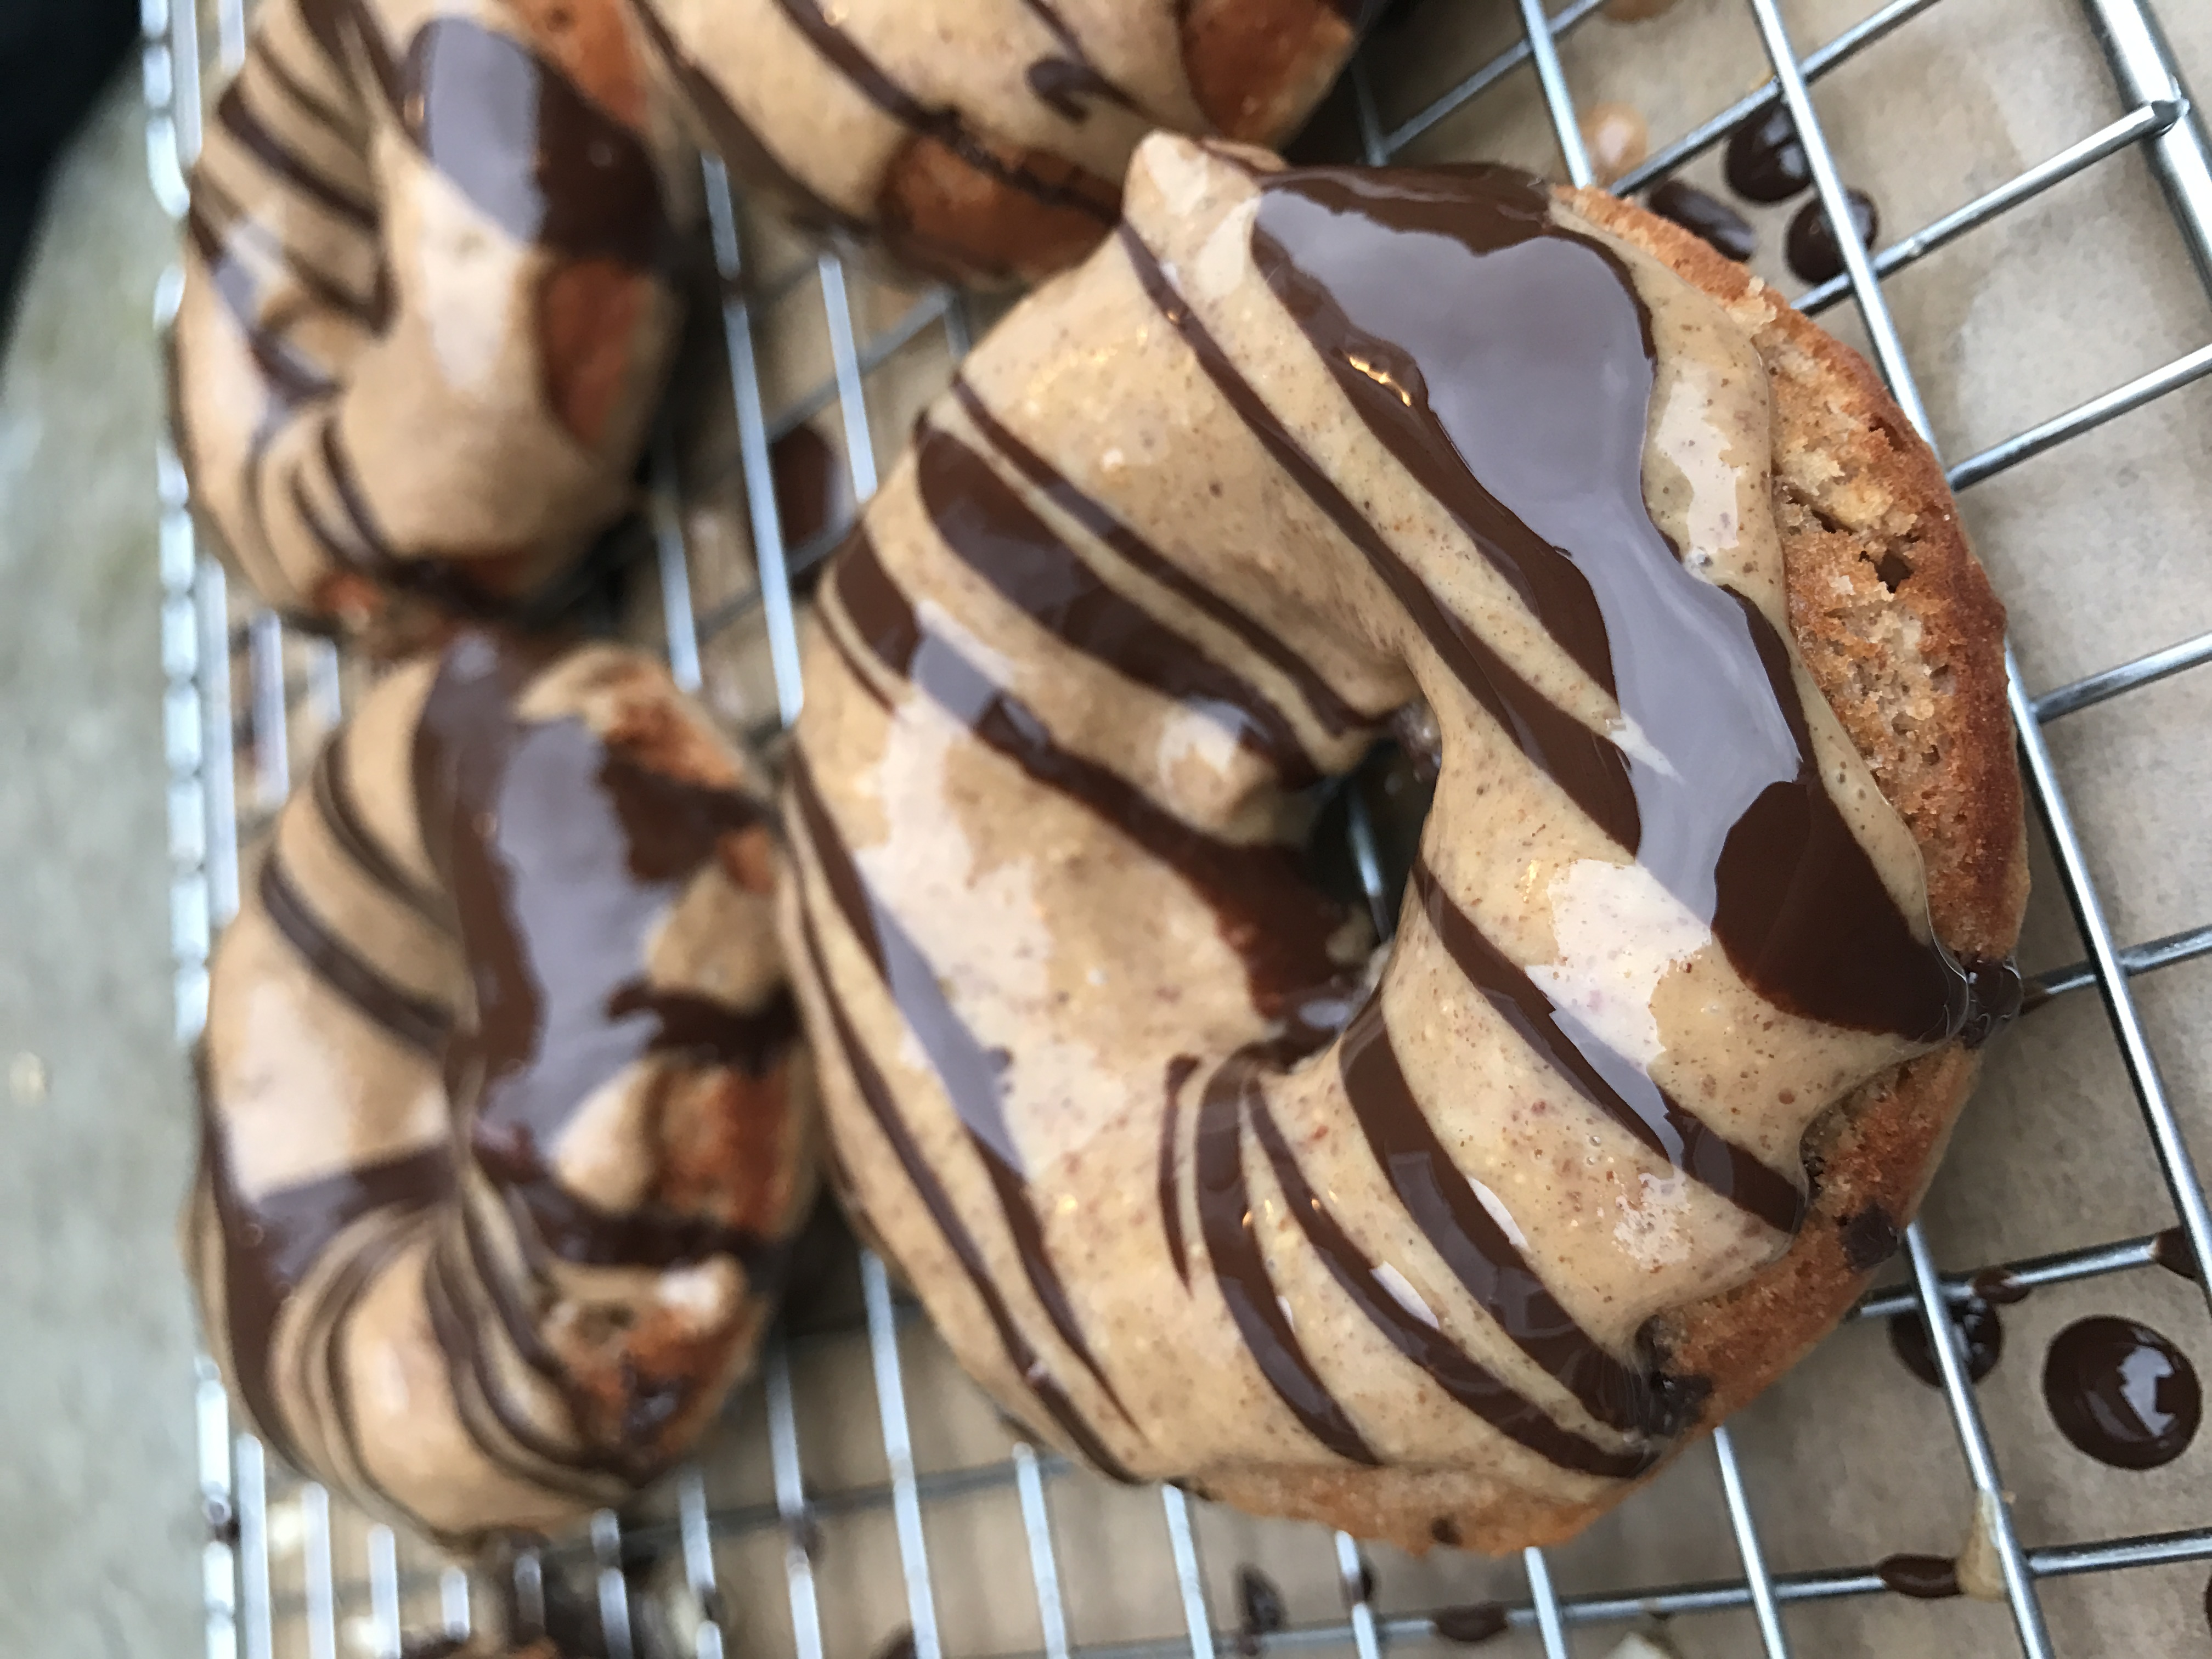 Chocolate and Peanut Butter Pronuts